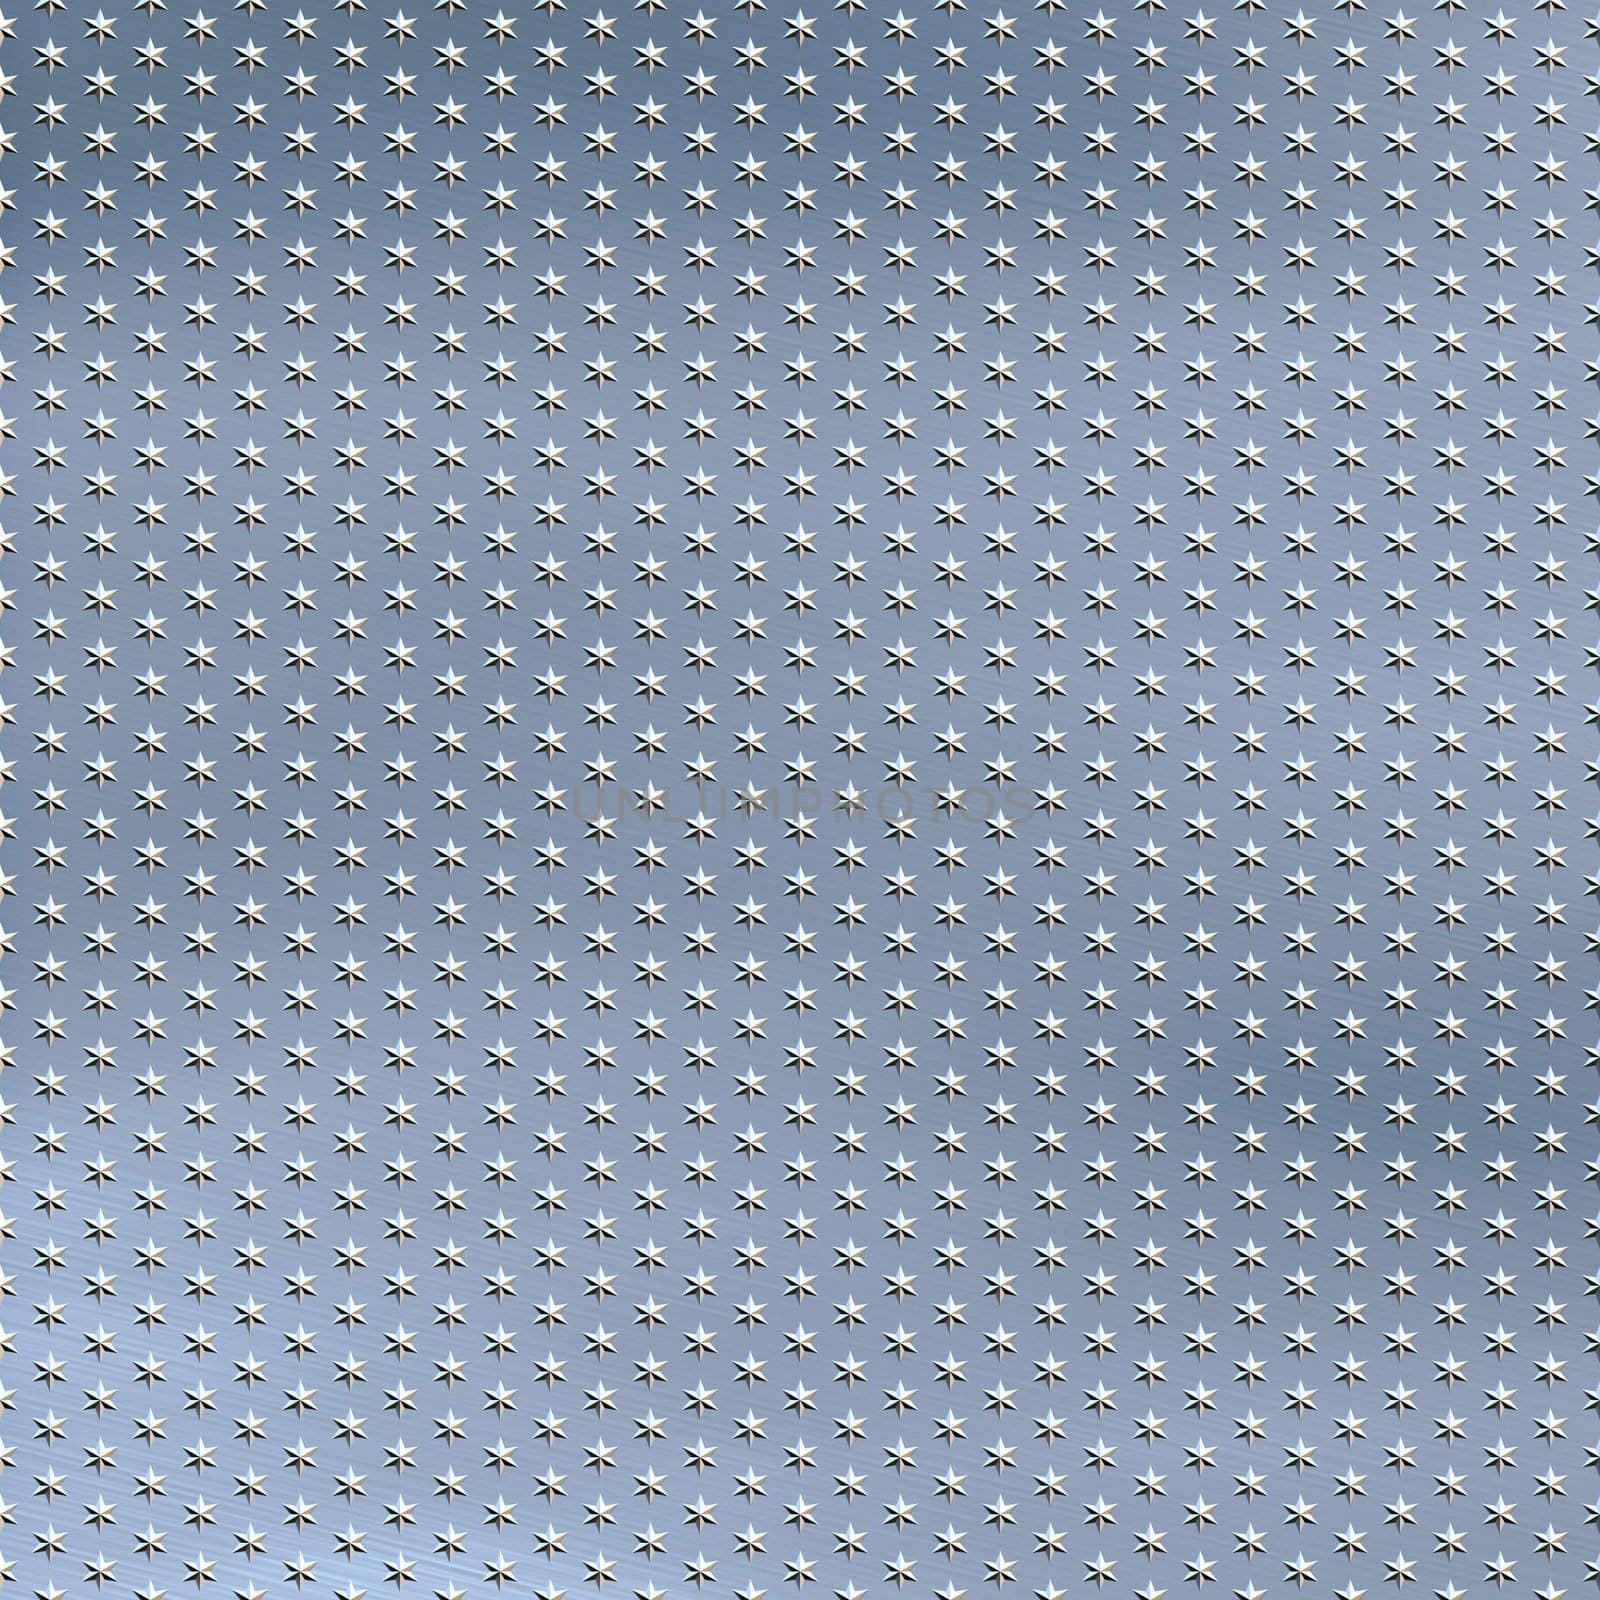 a large image of metallic stars on a lightly brushed metal background